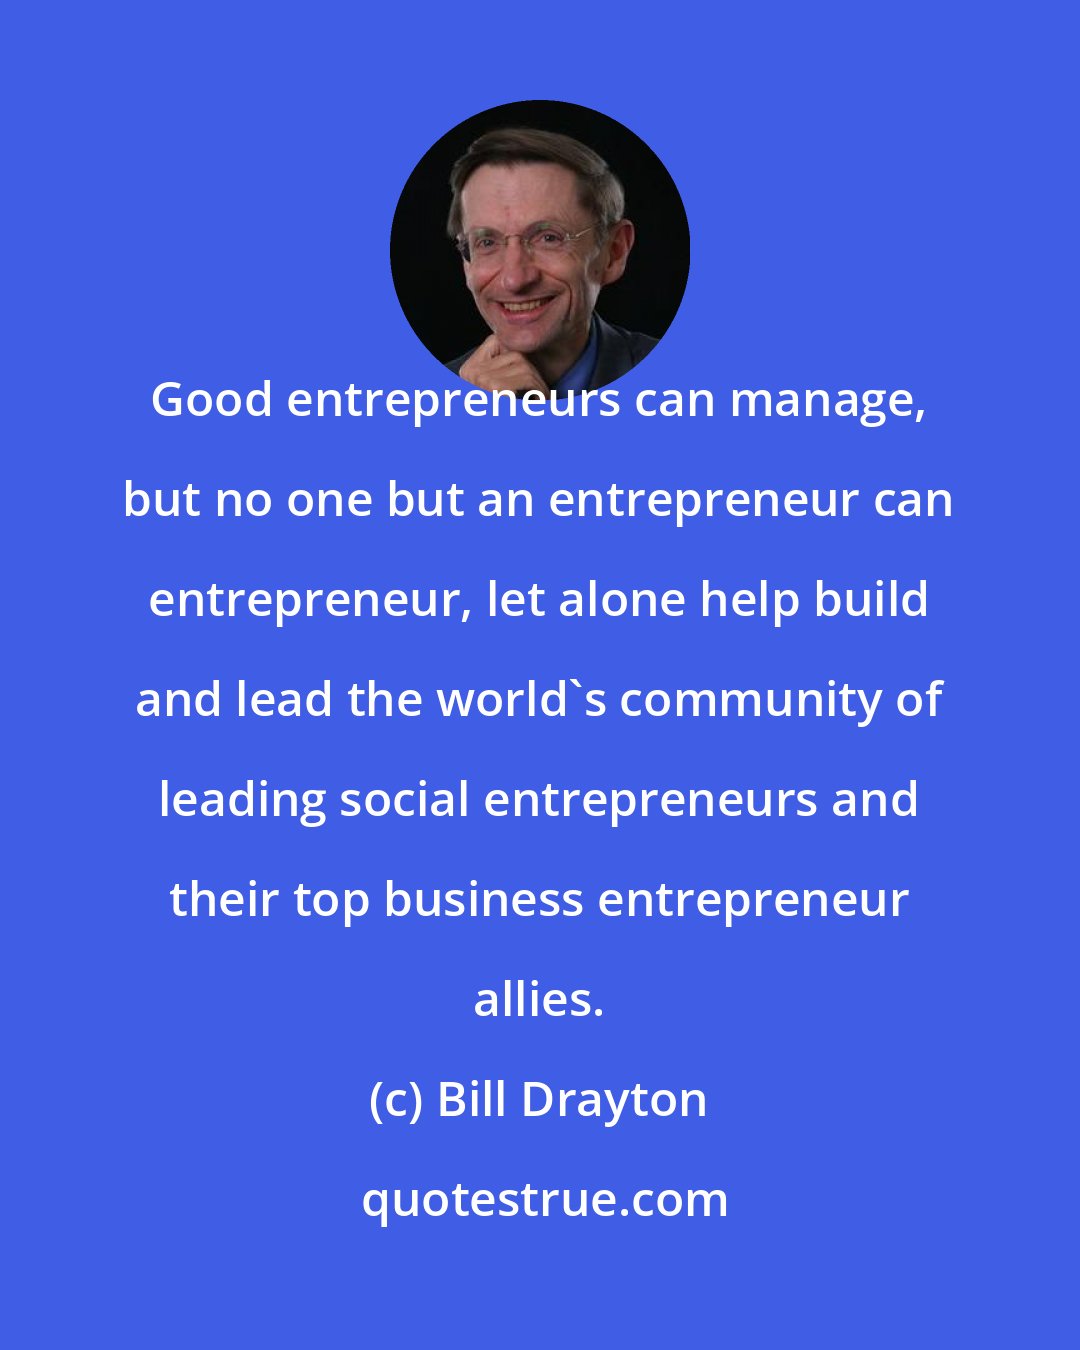 Bill Drayton: Good entrepreneurs can manage, but no one but an entrepreneur can entrepreneur, let alone help build and lead the world's community of leading social entrepreneurs and their top business entrepreneur allies.